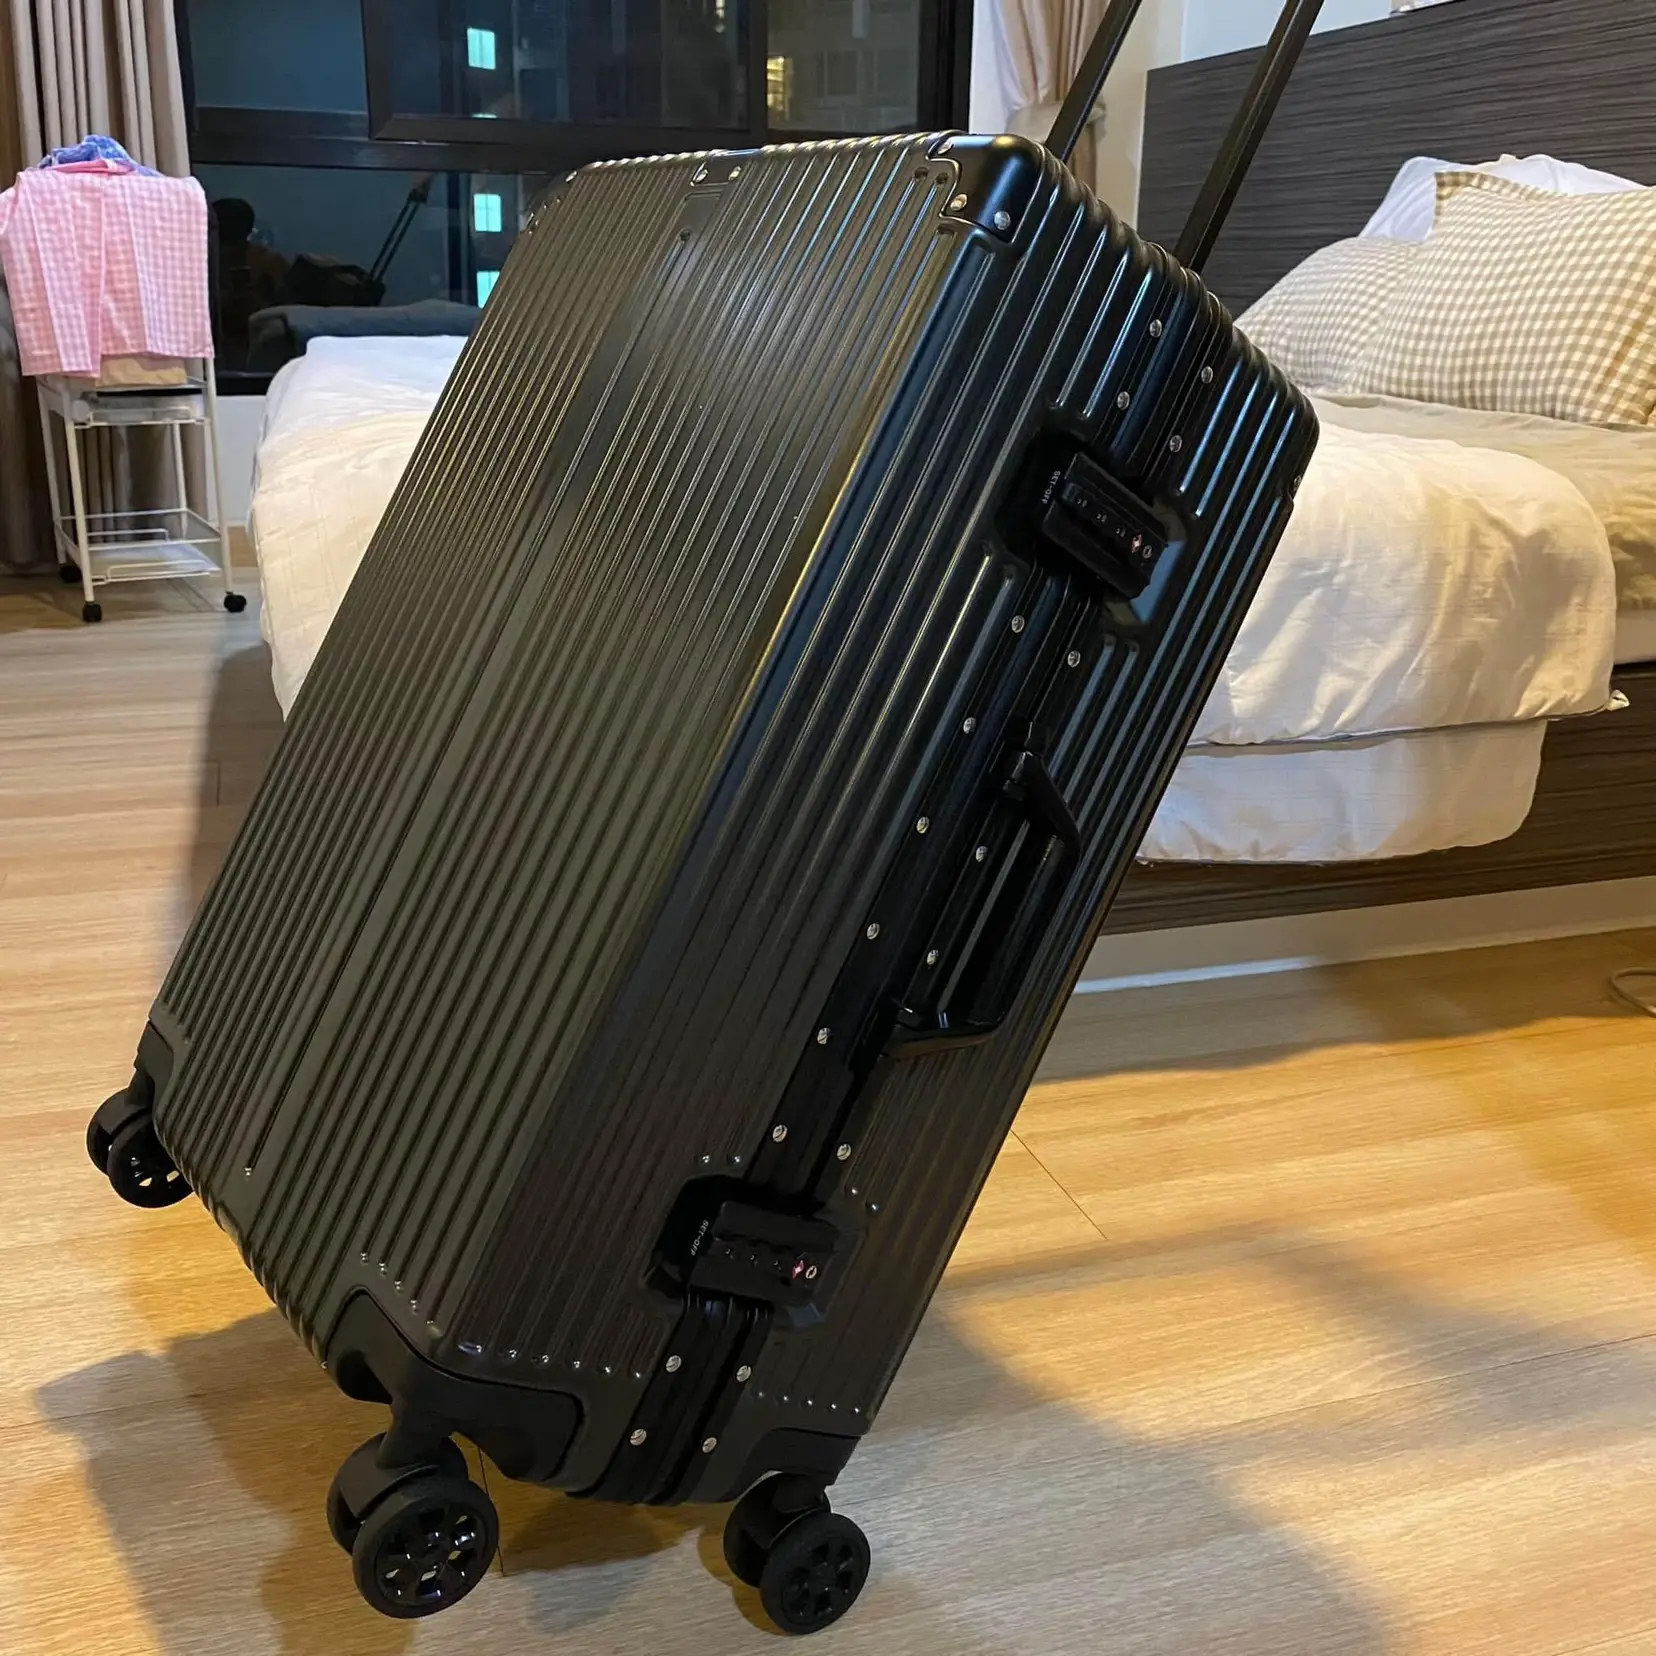 Luggage Story Travel Bag 🛫 | Gallery posted by Nice_Review | Lemon8